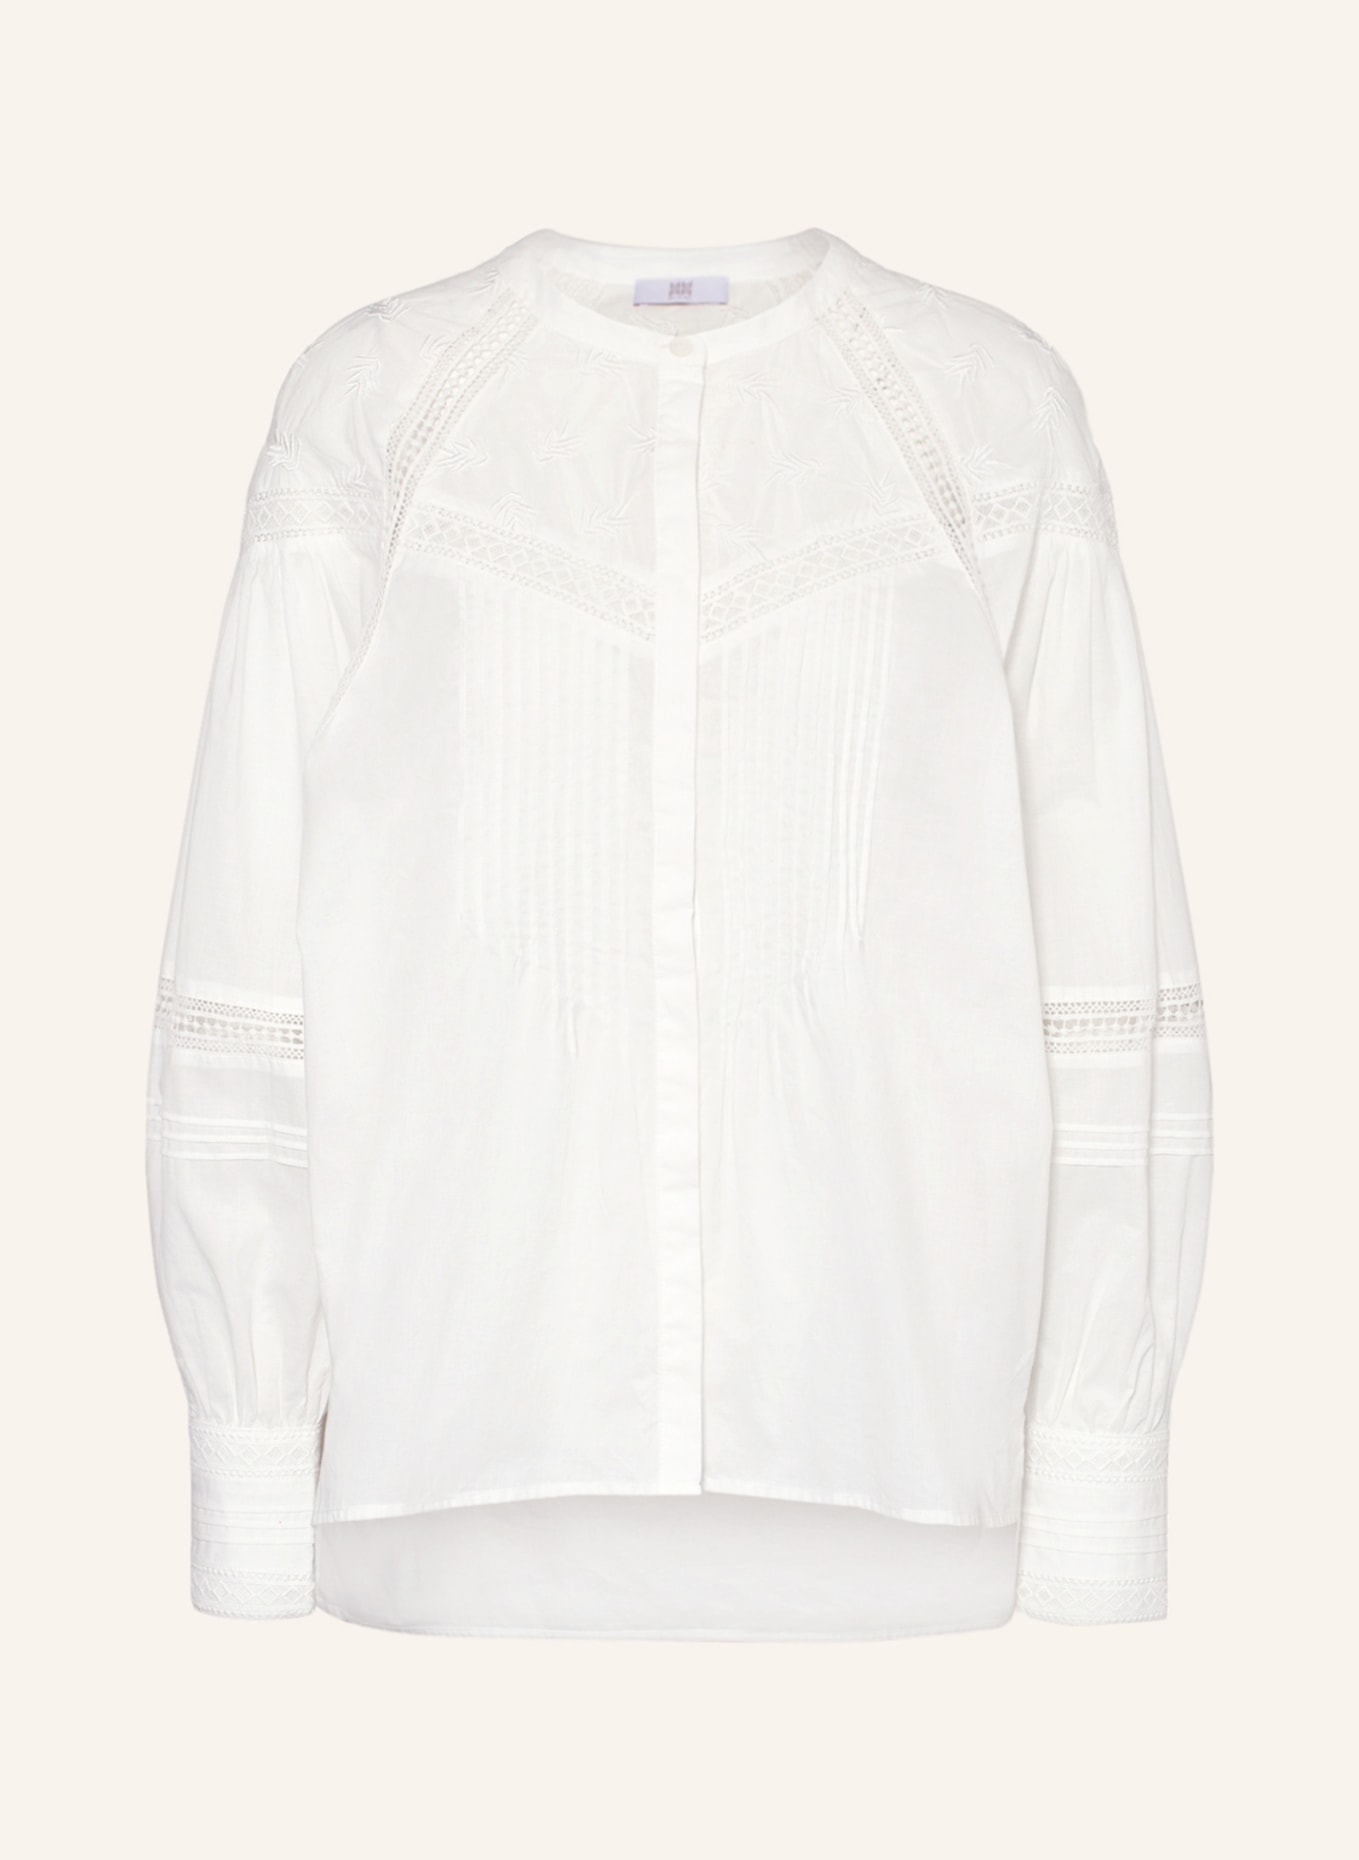 RIANI Shirt blouse with lace and embroidery, Color: CREAM (Image 1)